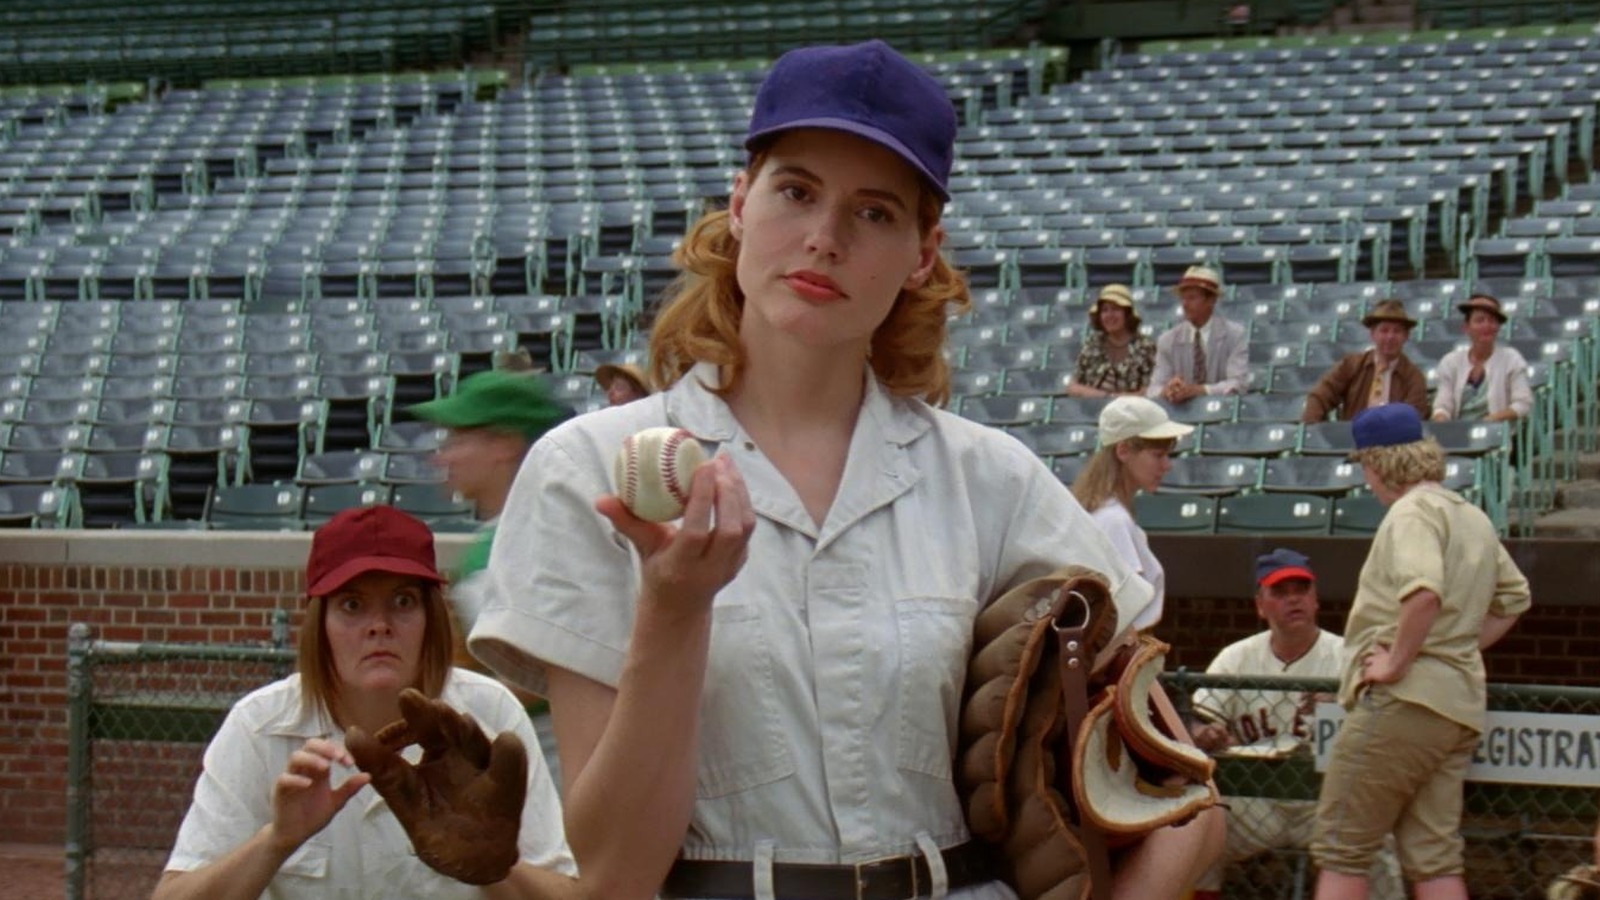 In 'A League of Their Own,' the Rockford Peaches step up to the plate